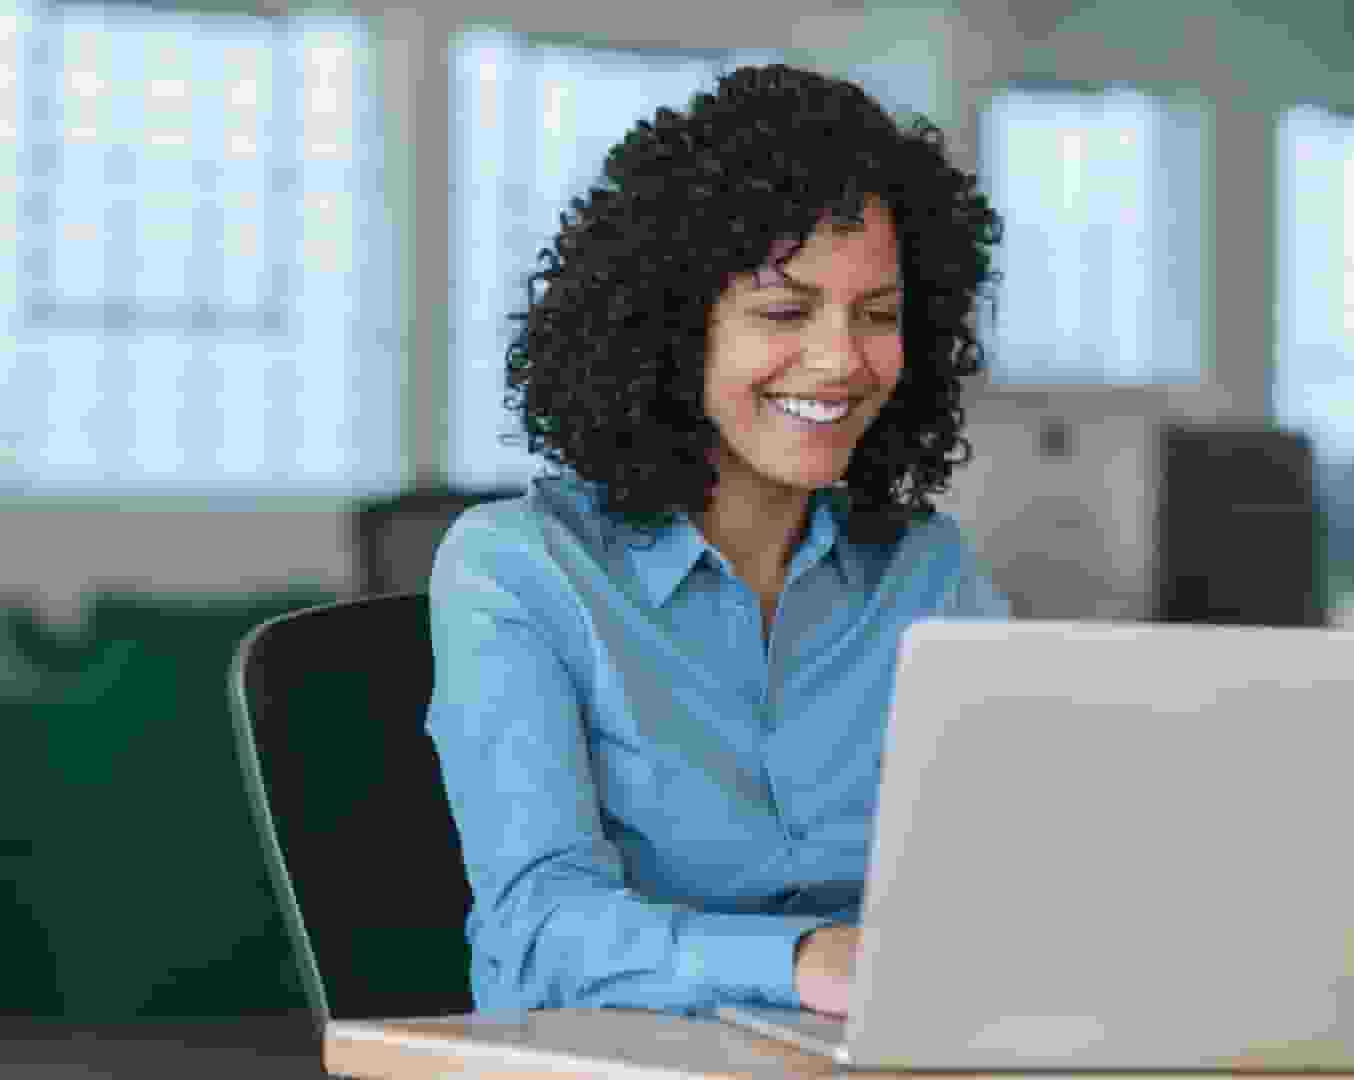 Woman in blue shirt with curly black hair smiles with delight while working on her laptop